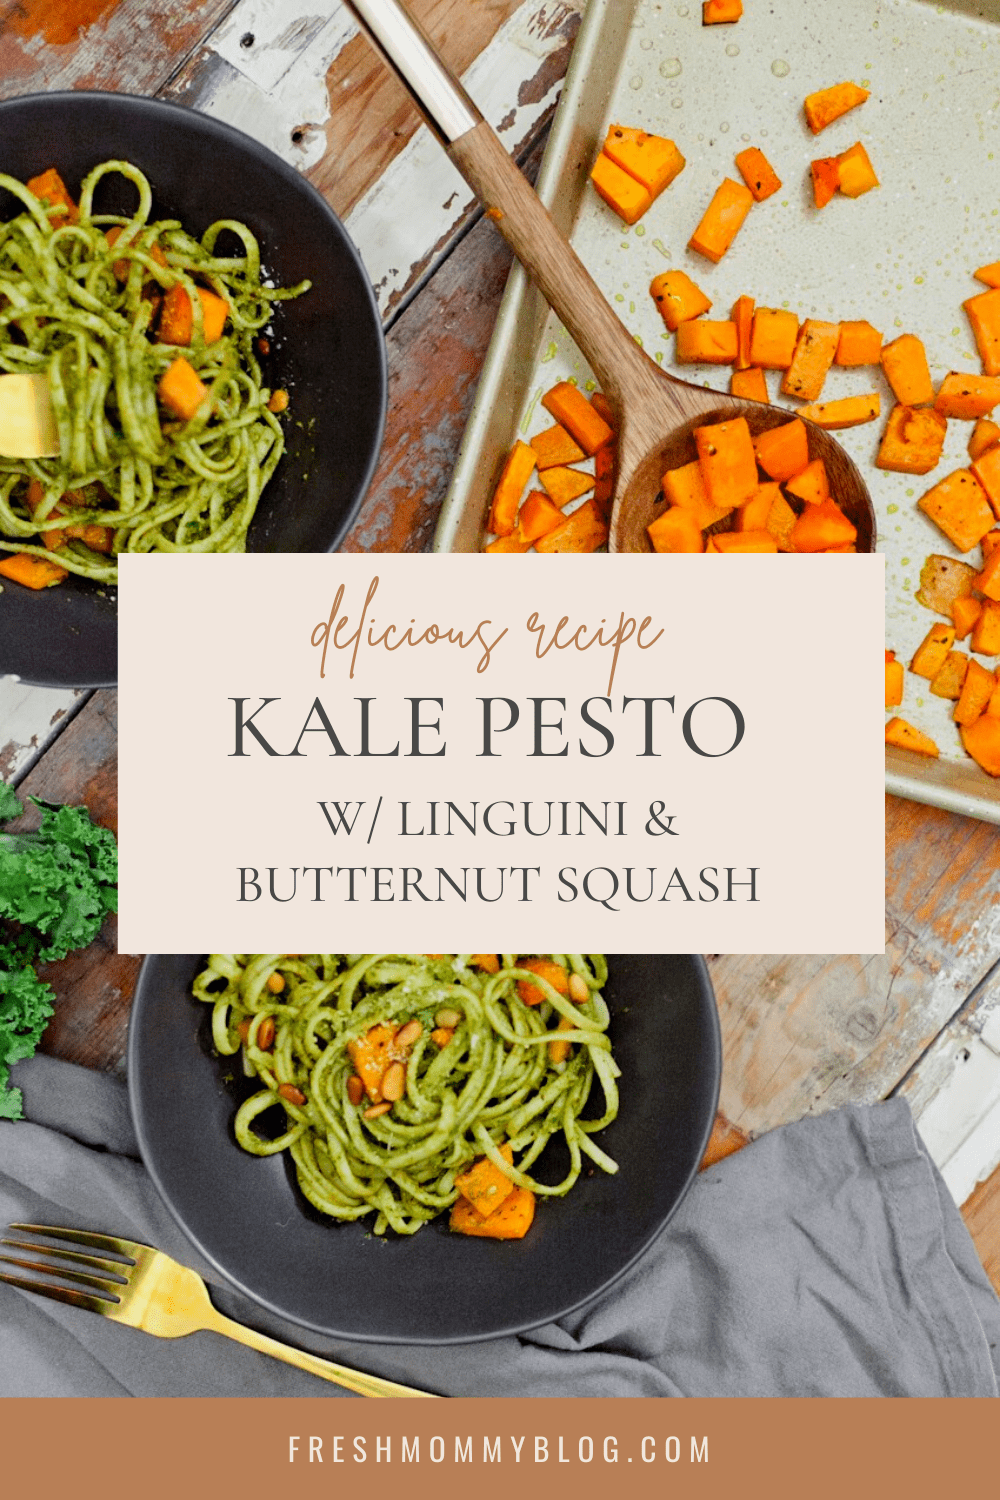 A Delicious Kale Pesto Recipe with Linguini & Butternut Squash for a deliciously satisfying vegetarian meal featured by top Florida lifestyle blog, Fresh Mommy Blog